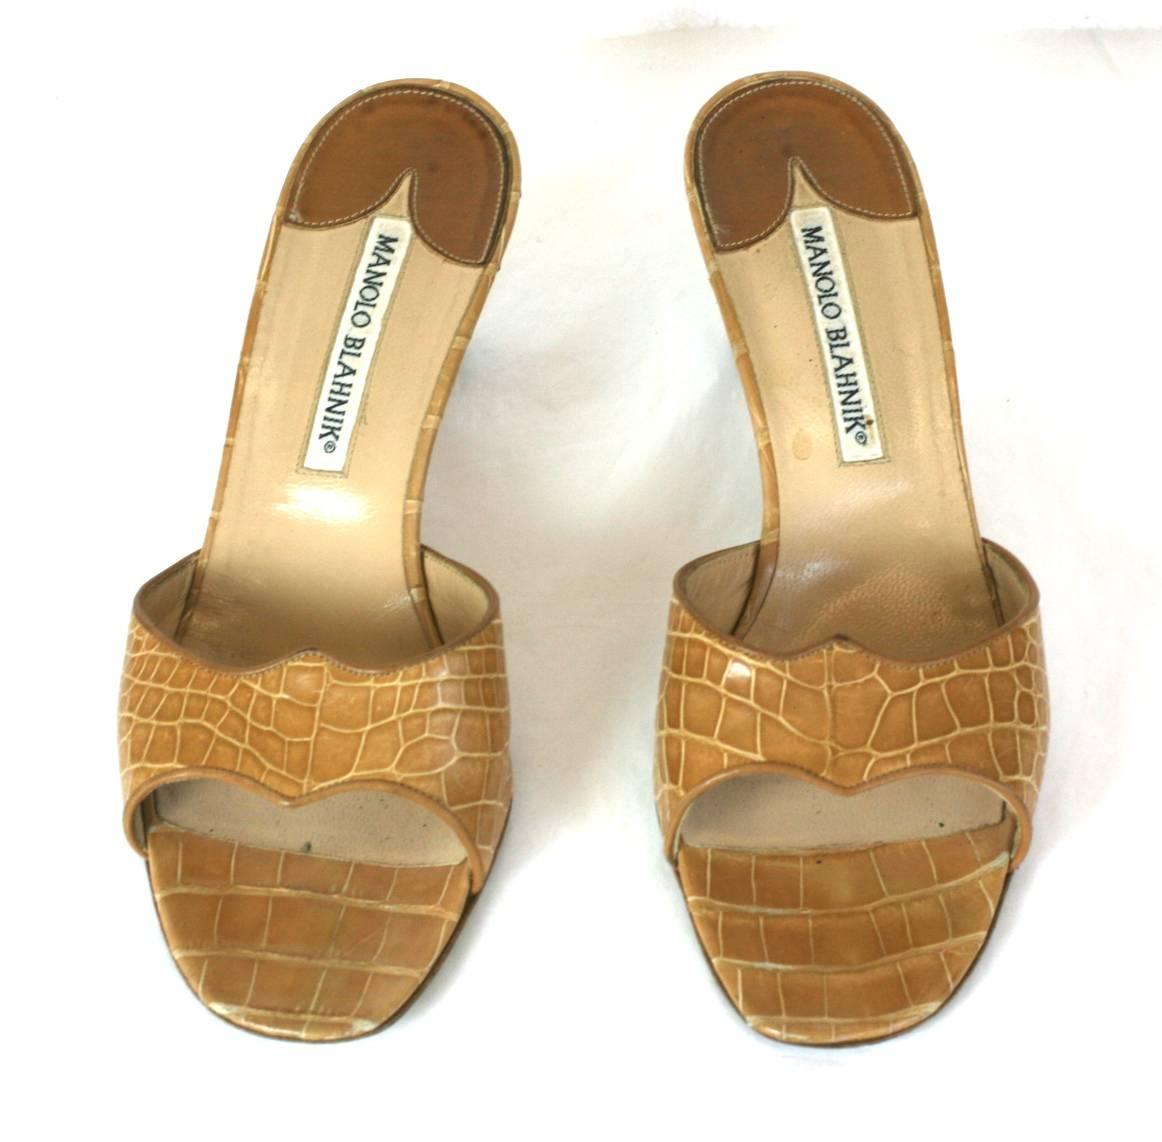 Manolo Blahnik's easy caramel crocodile slide mules with medium stacked heel. 
From the Estate of actress, Ruby Dee. Excellent condition. Size 38. 1990's. .